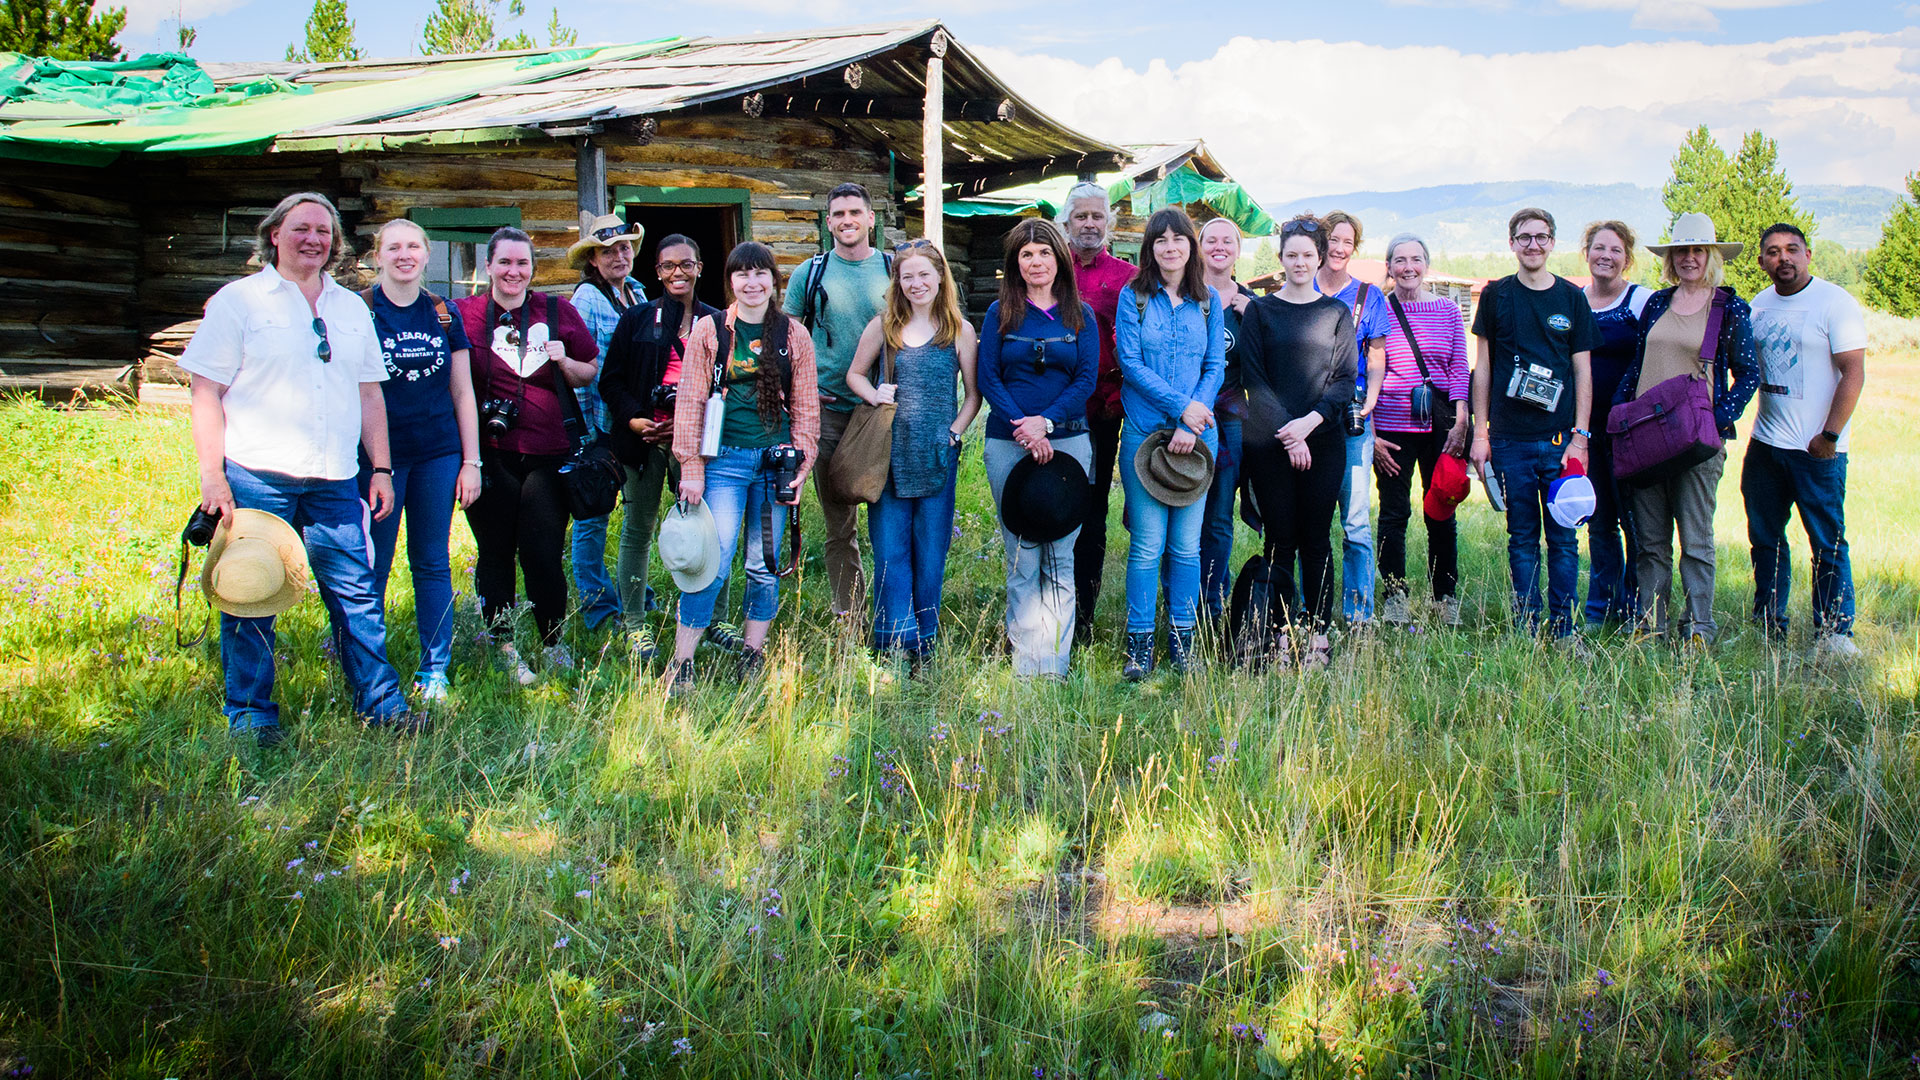 Students and faculty at the 2017 Field School for Cultural Documentation, where they collected the folklore of dude ranches.